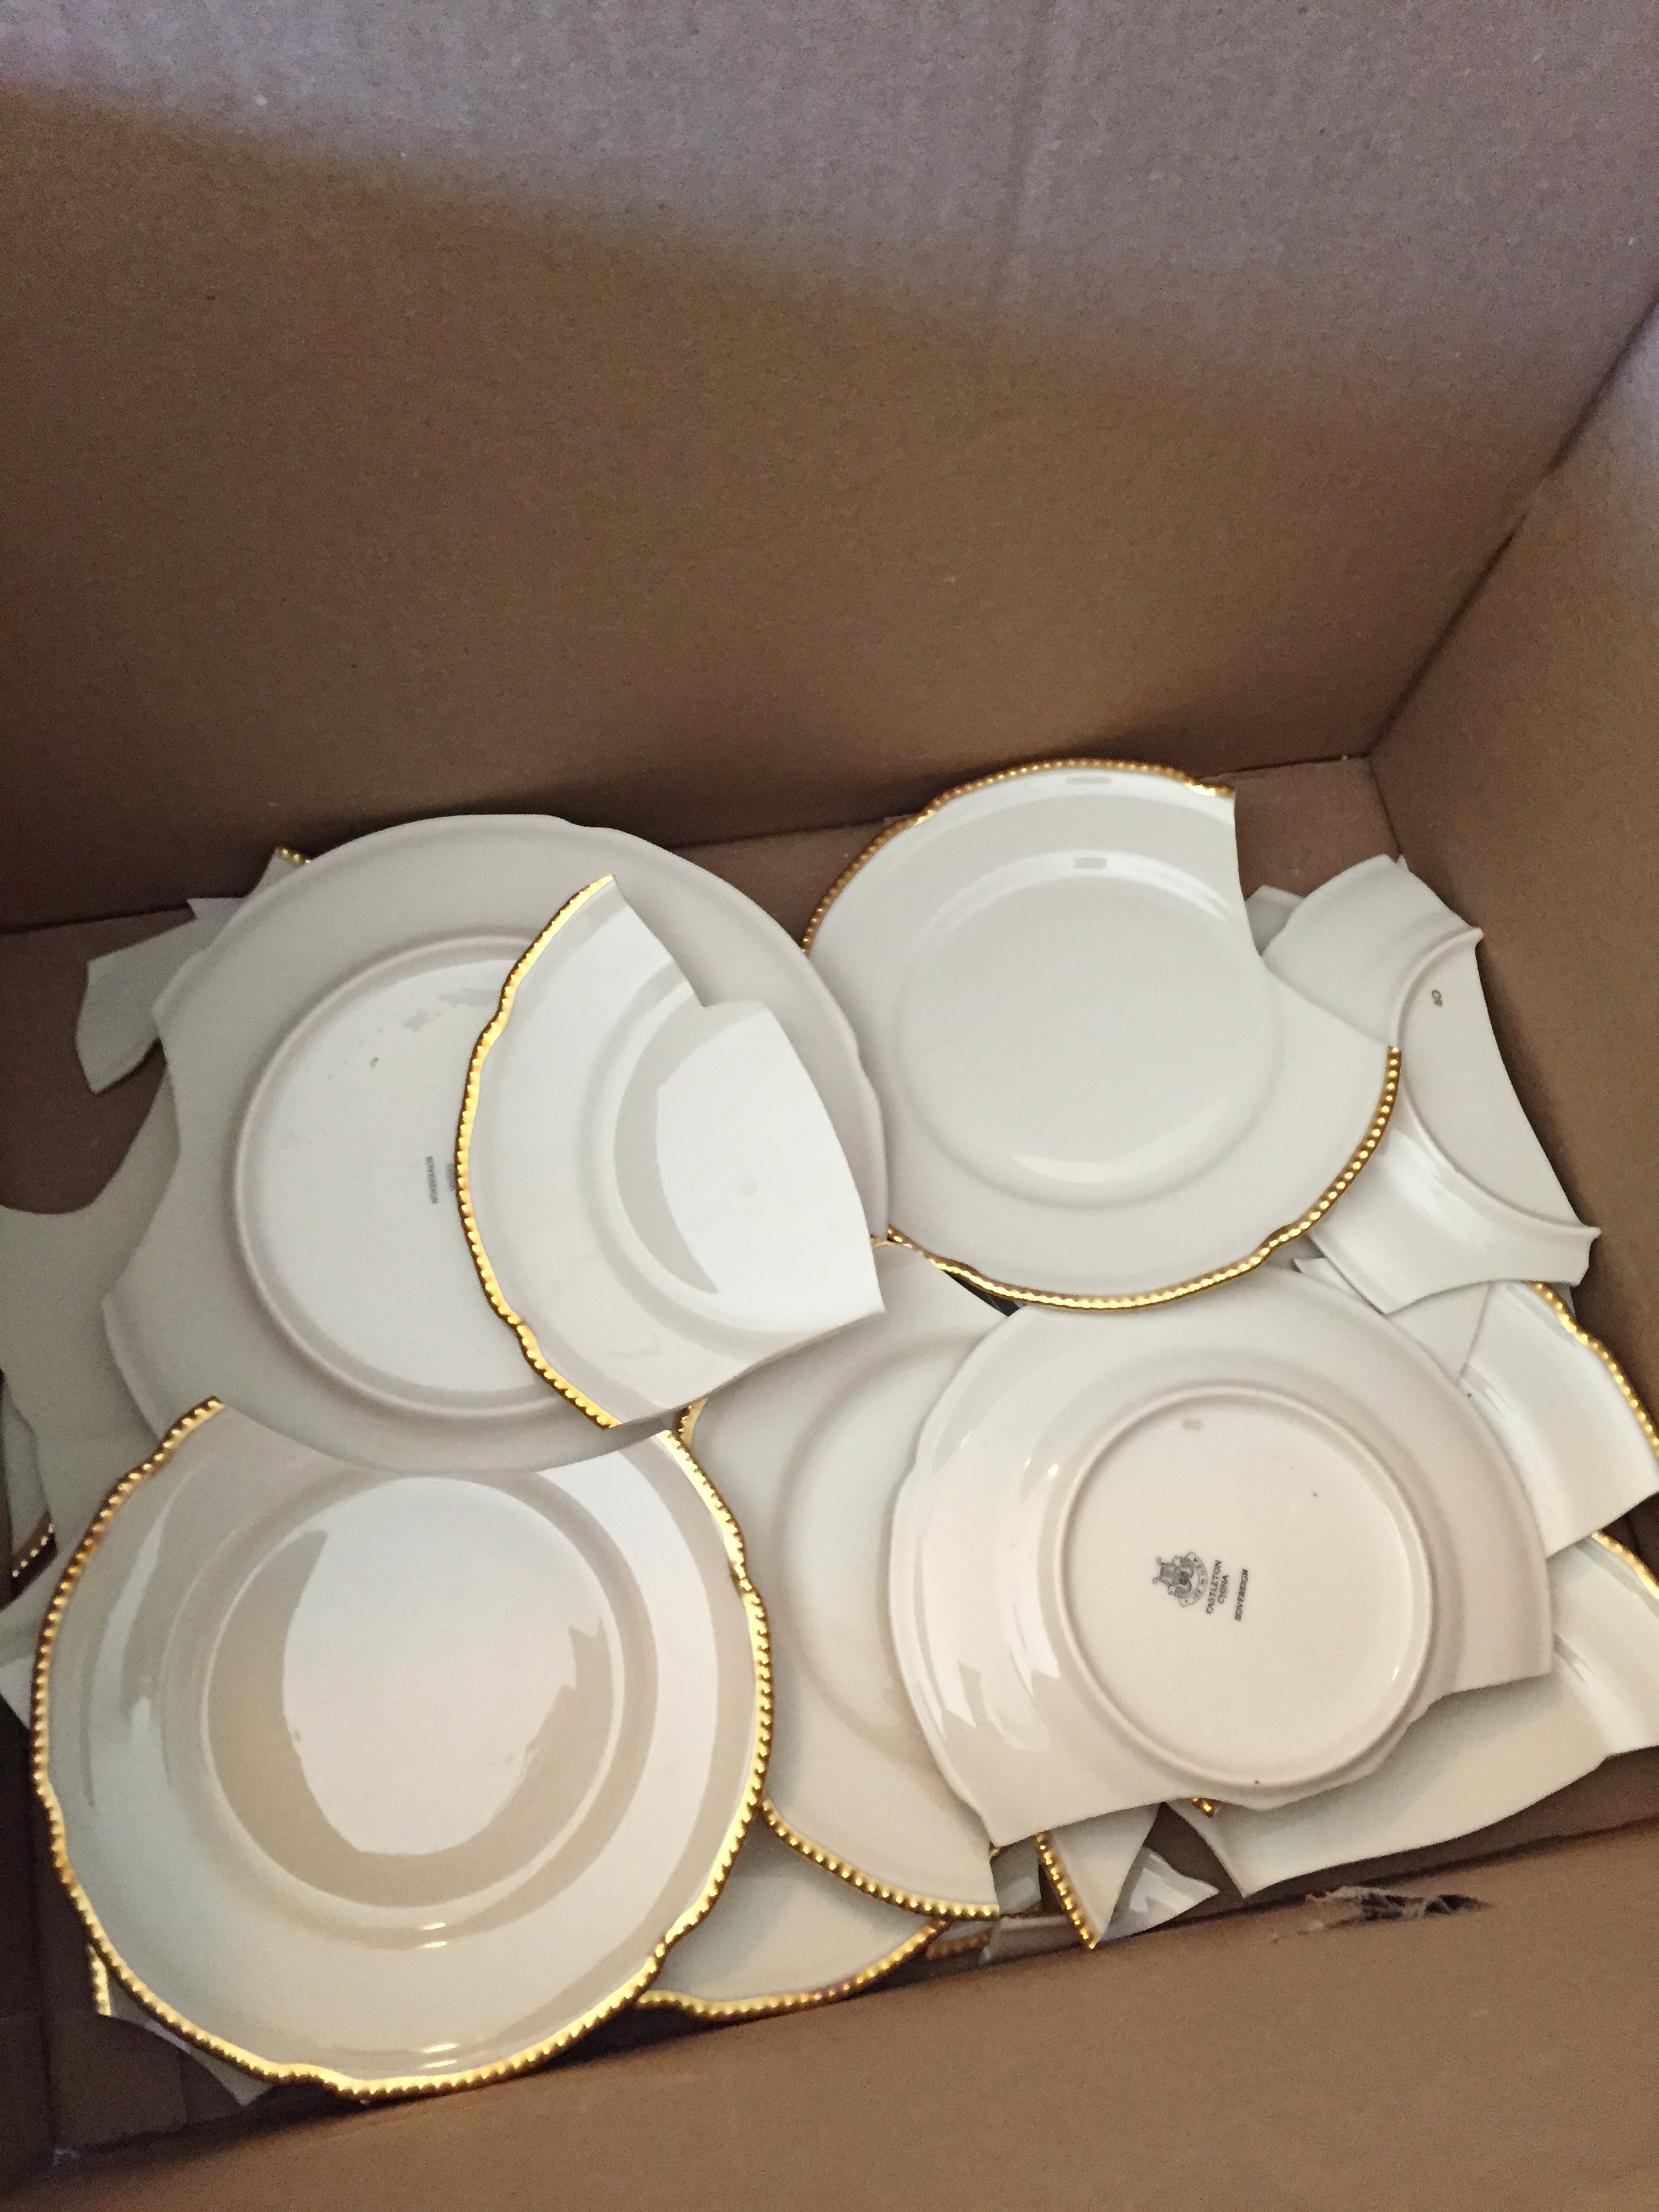 How my grandmother's china was packed